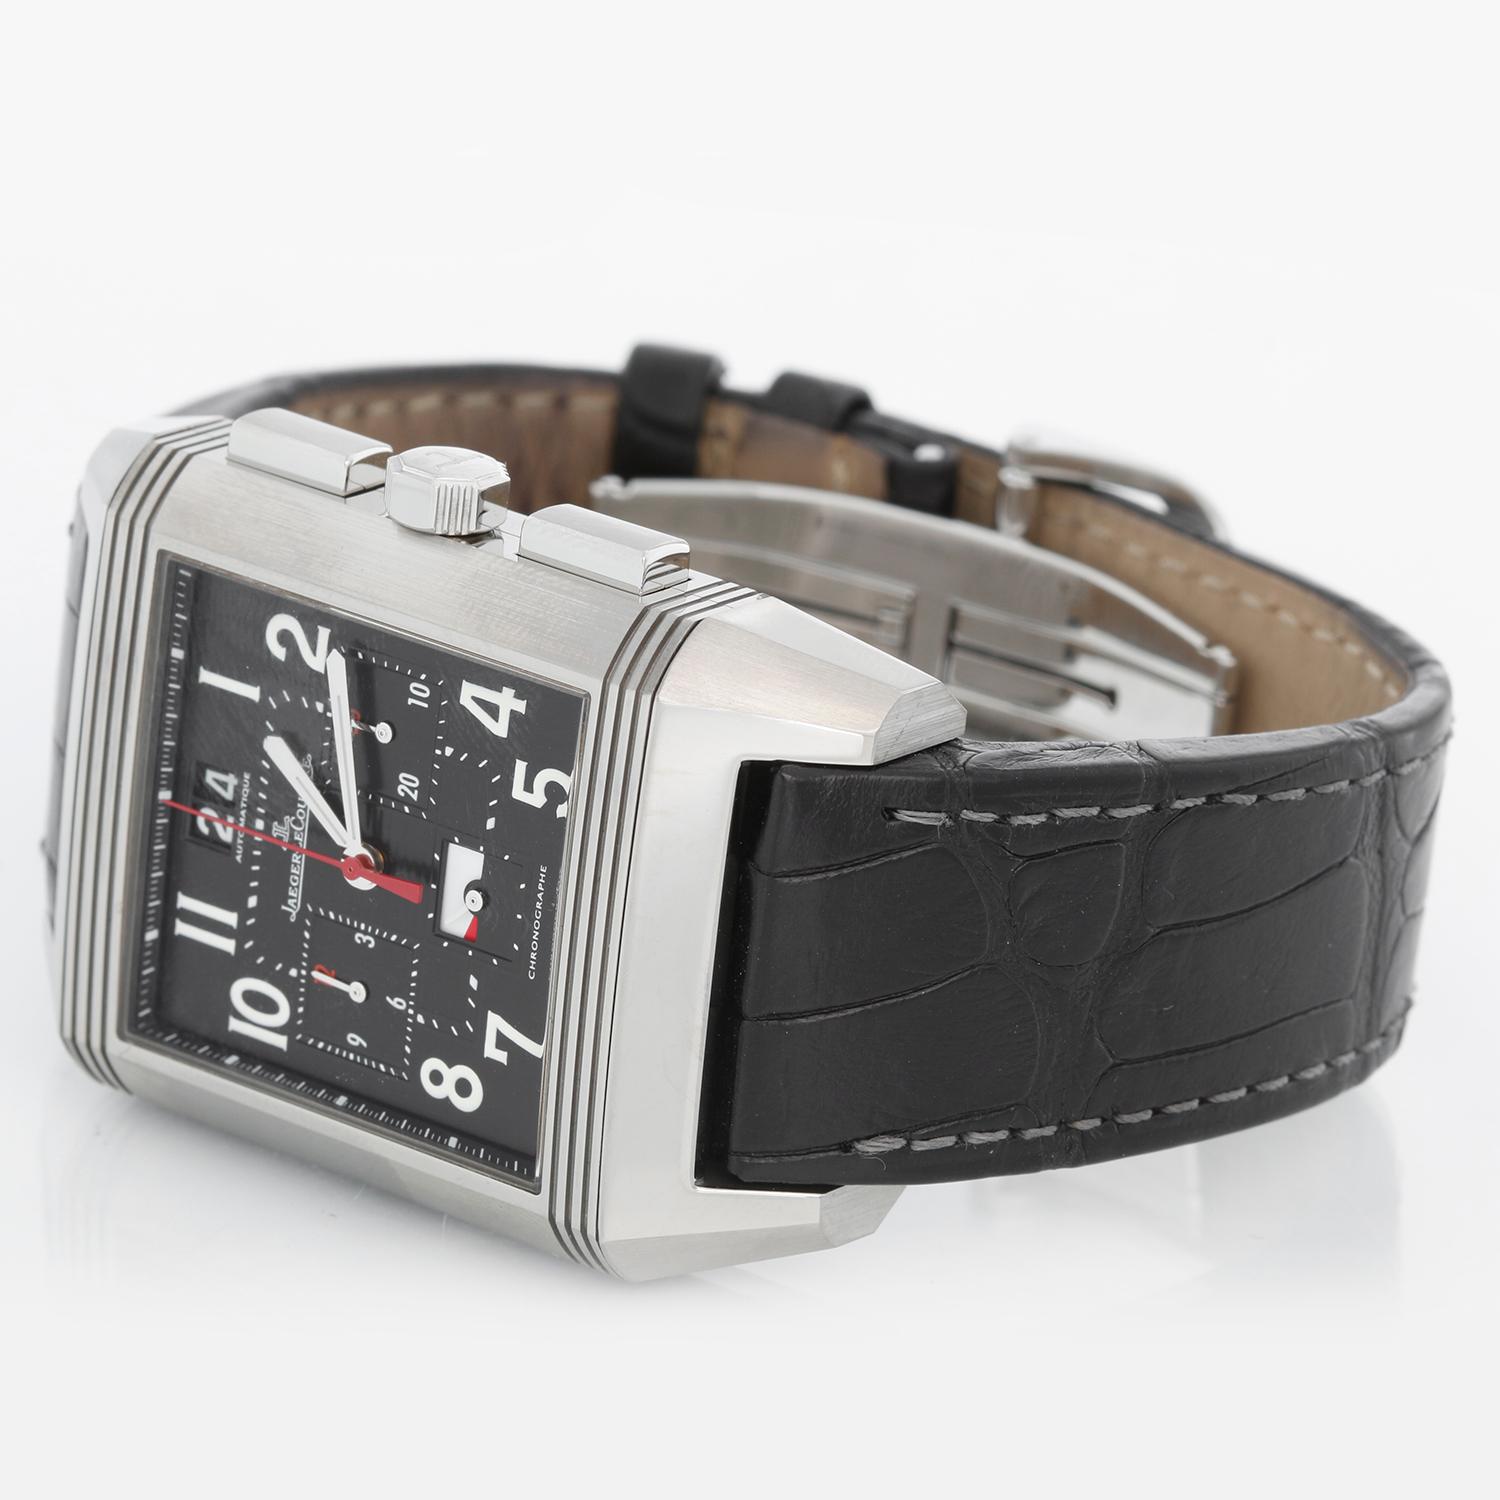 Jaeger-LeCoultre Reverso Squadra World Time Watch 231.T.50 - Automatic movement. Black ceramic on titanium ( 36 x 52 mm ) . Black dial with silver-toned hands and Arabic hour markers. Ceramic and titanium case with a black rubber strap and deployant